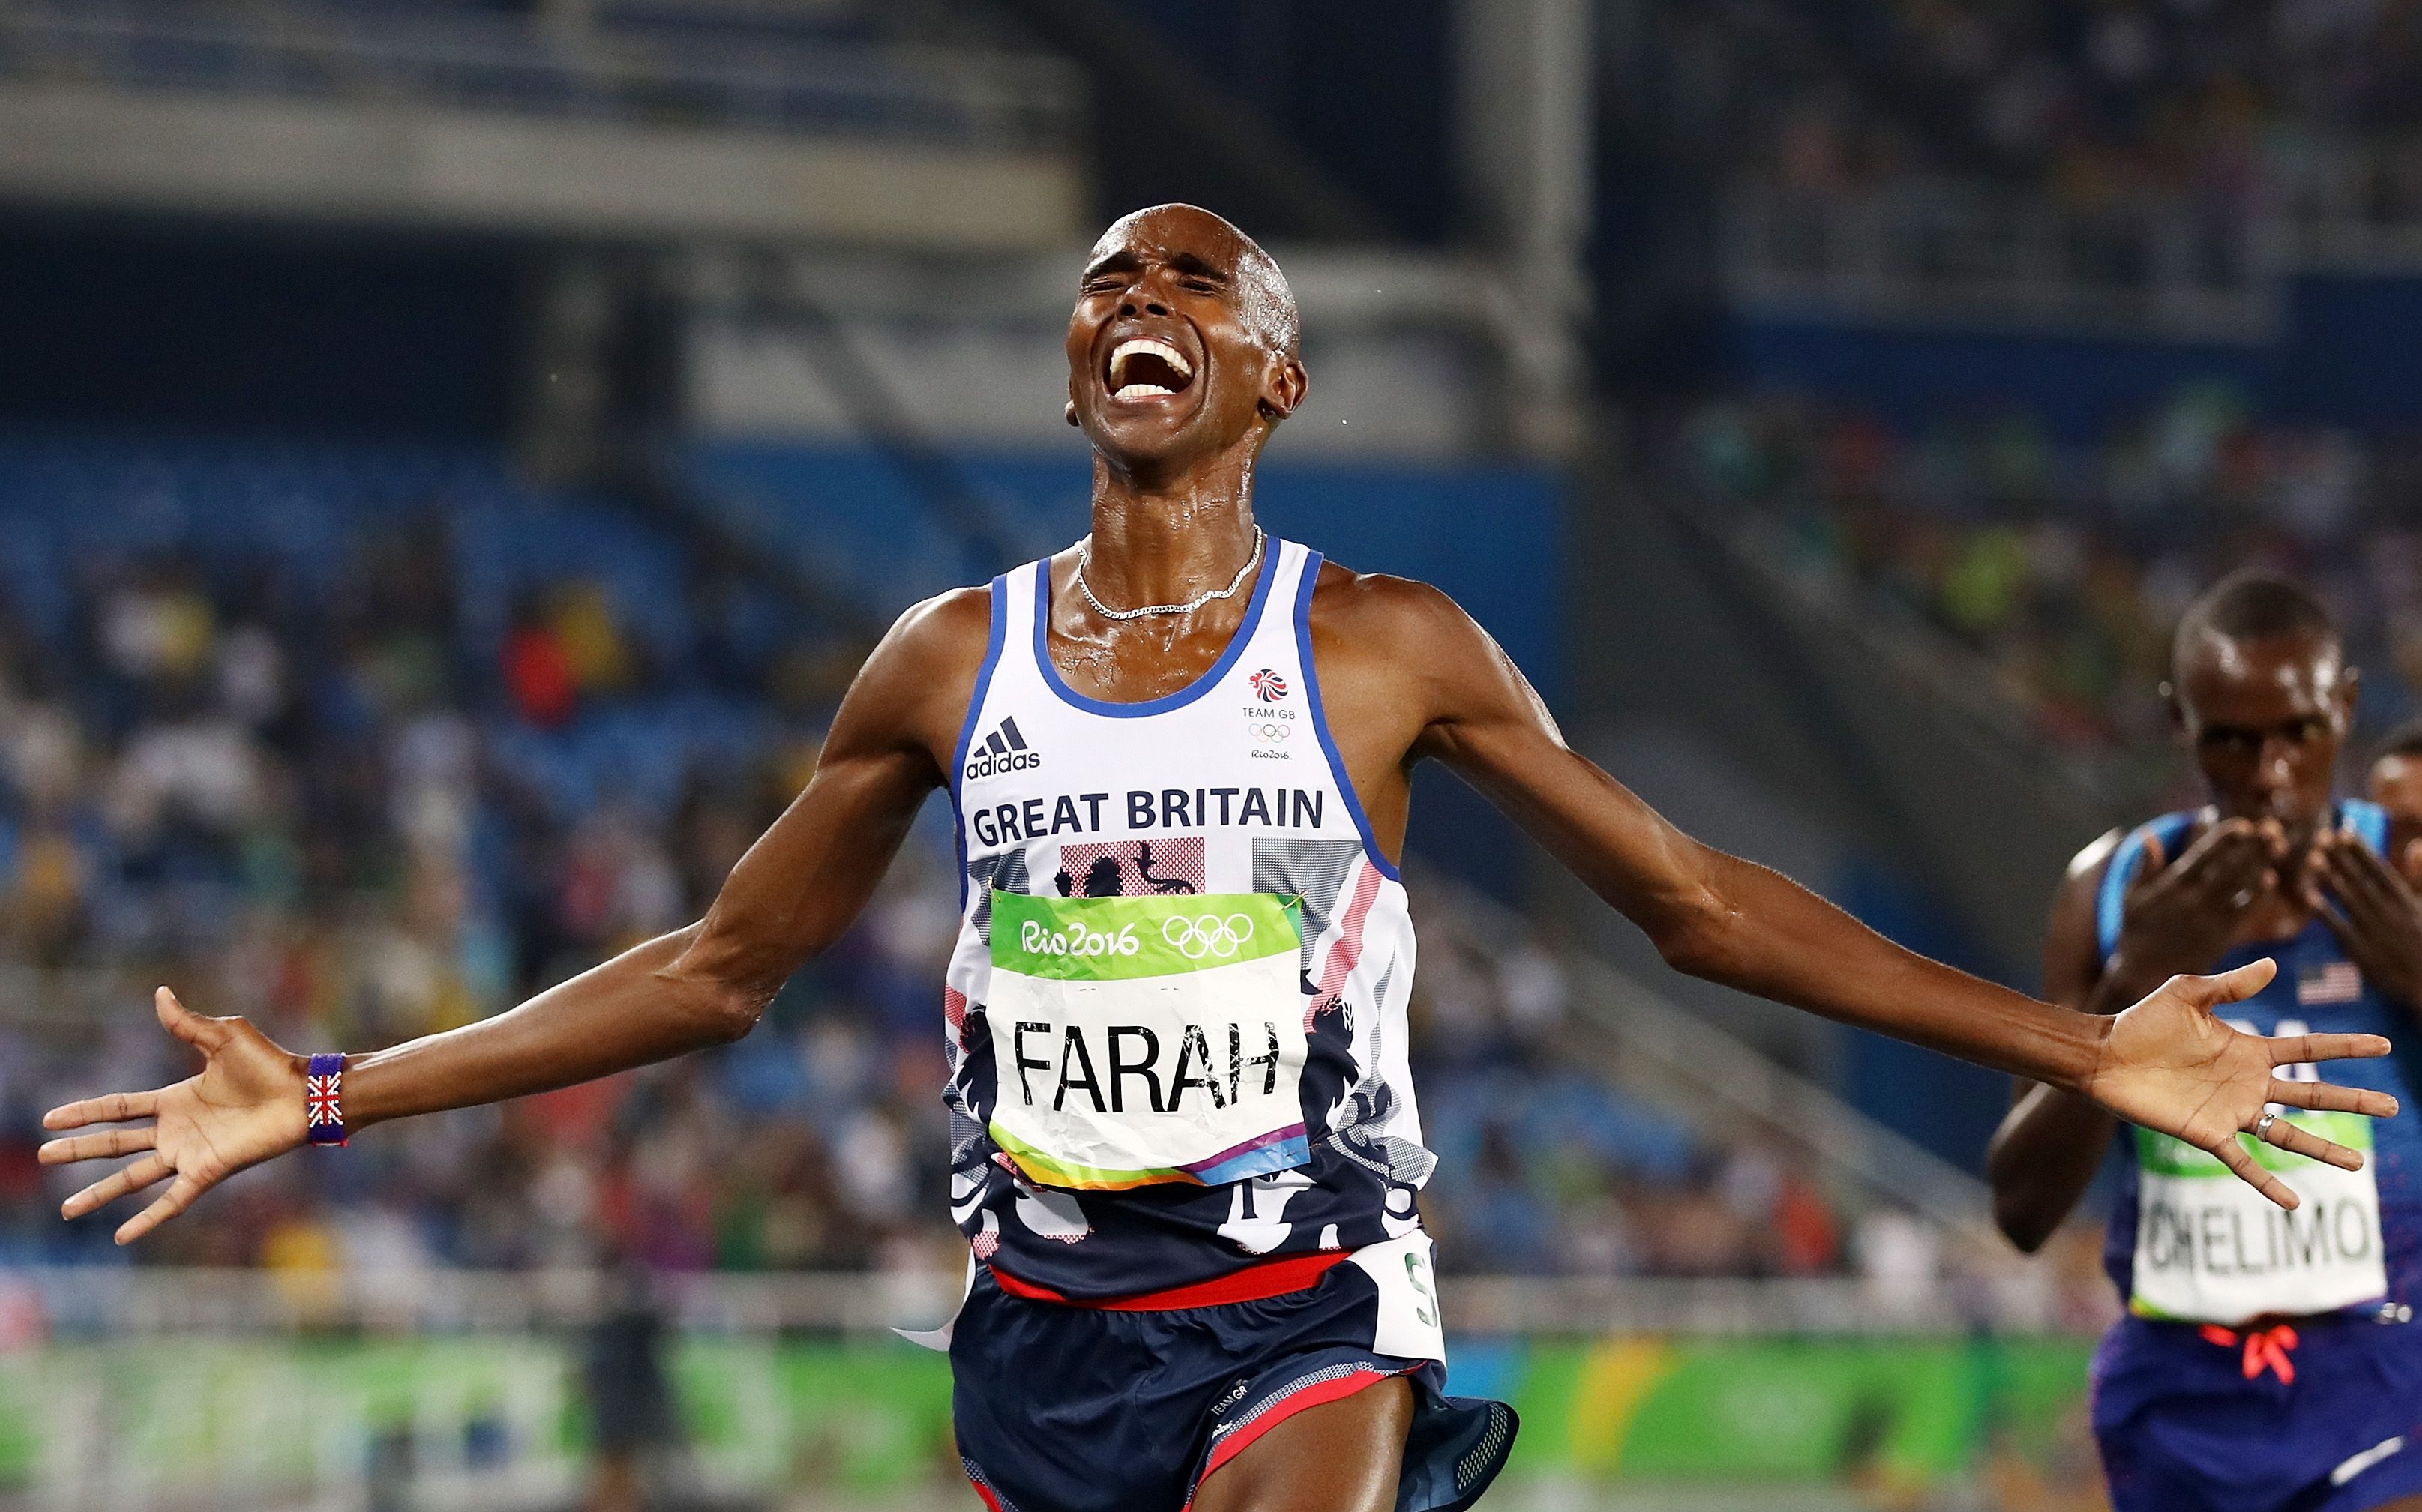 Mo Farah announces he will return to the track in Tokyo 2020